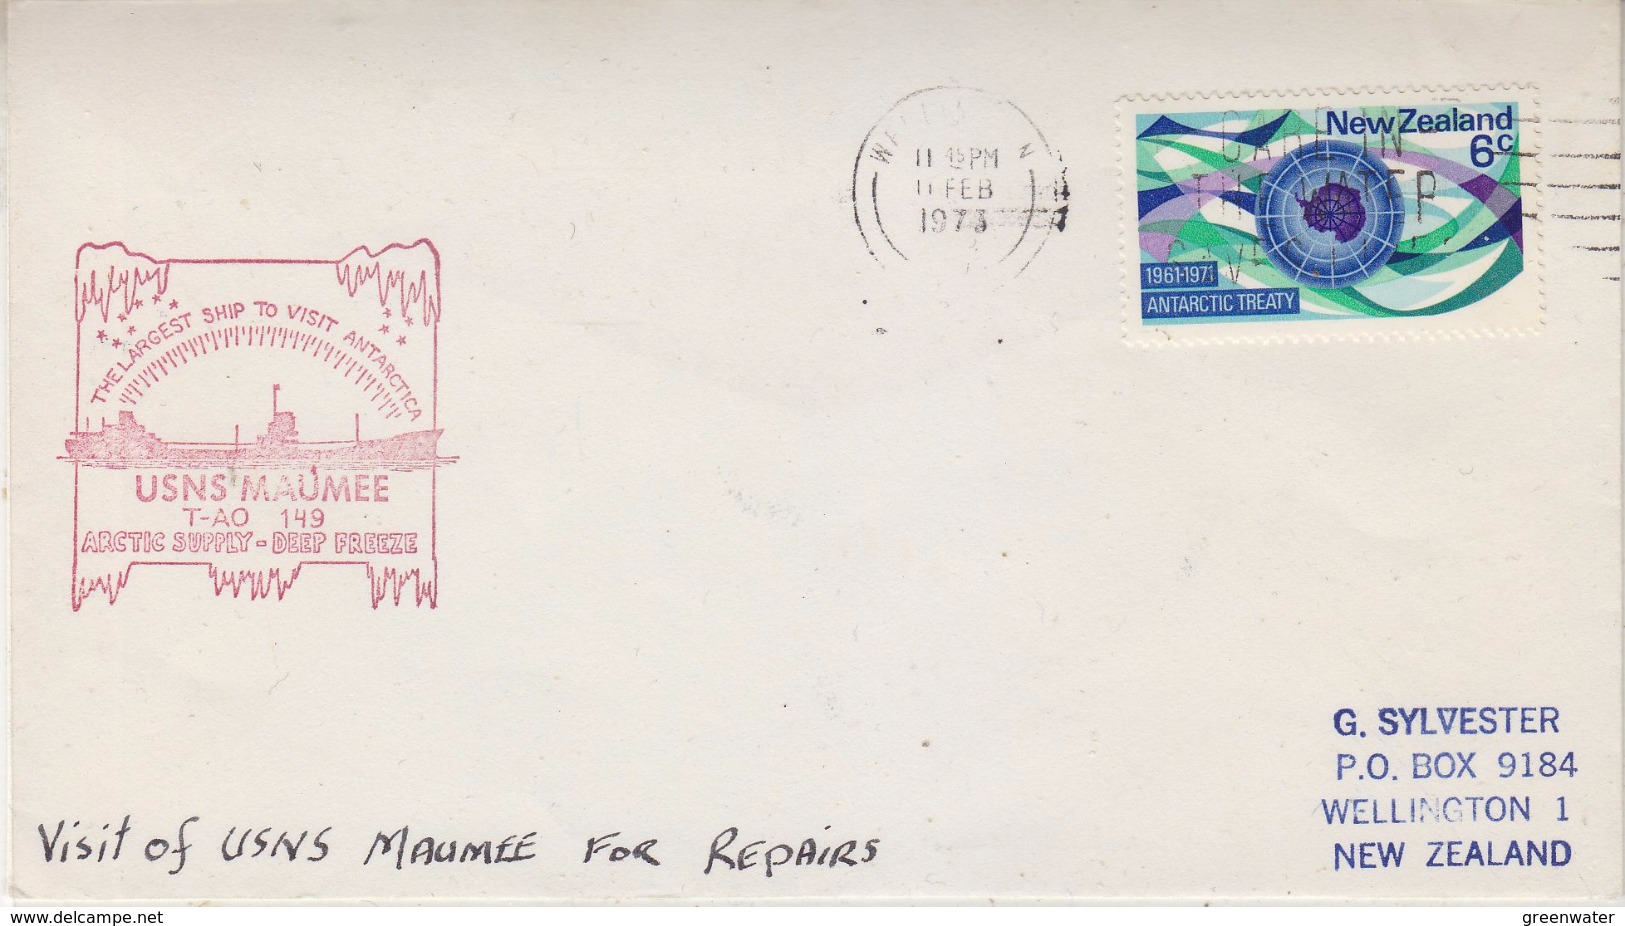 New Zealand 1973 USNS Maumee The Largest Ship To Visit Antarctica Ca Wellington 11 Feb 1973 Cover (34844) - Polar Ships & Icebreakers